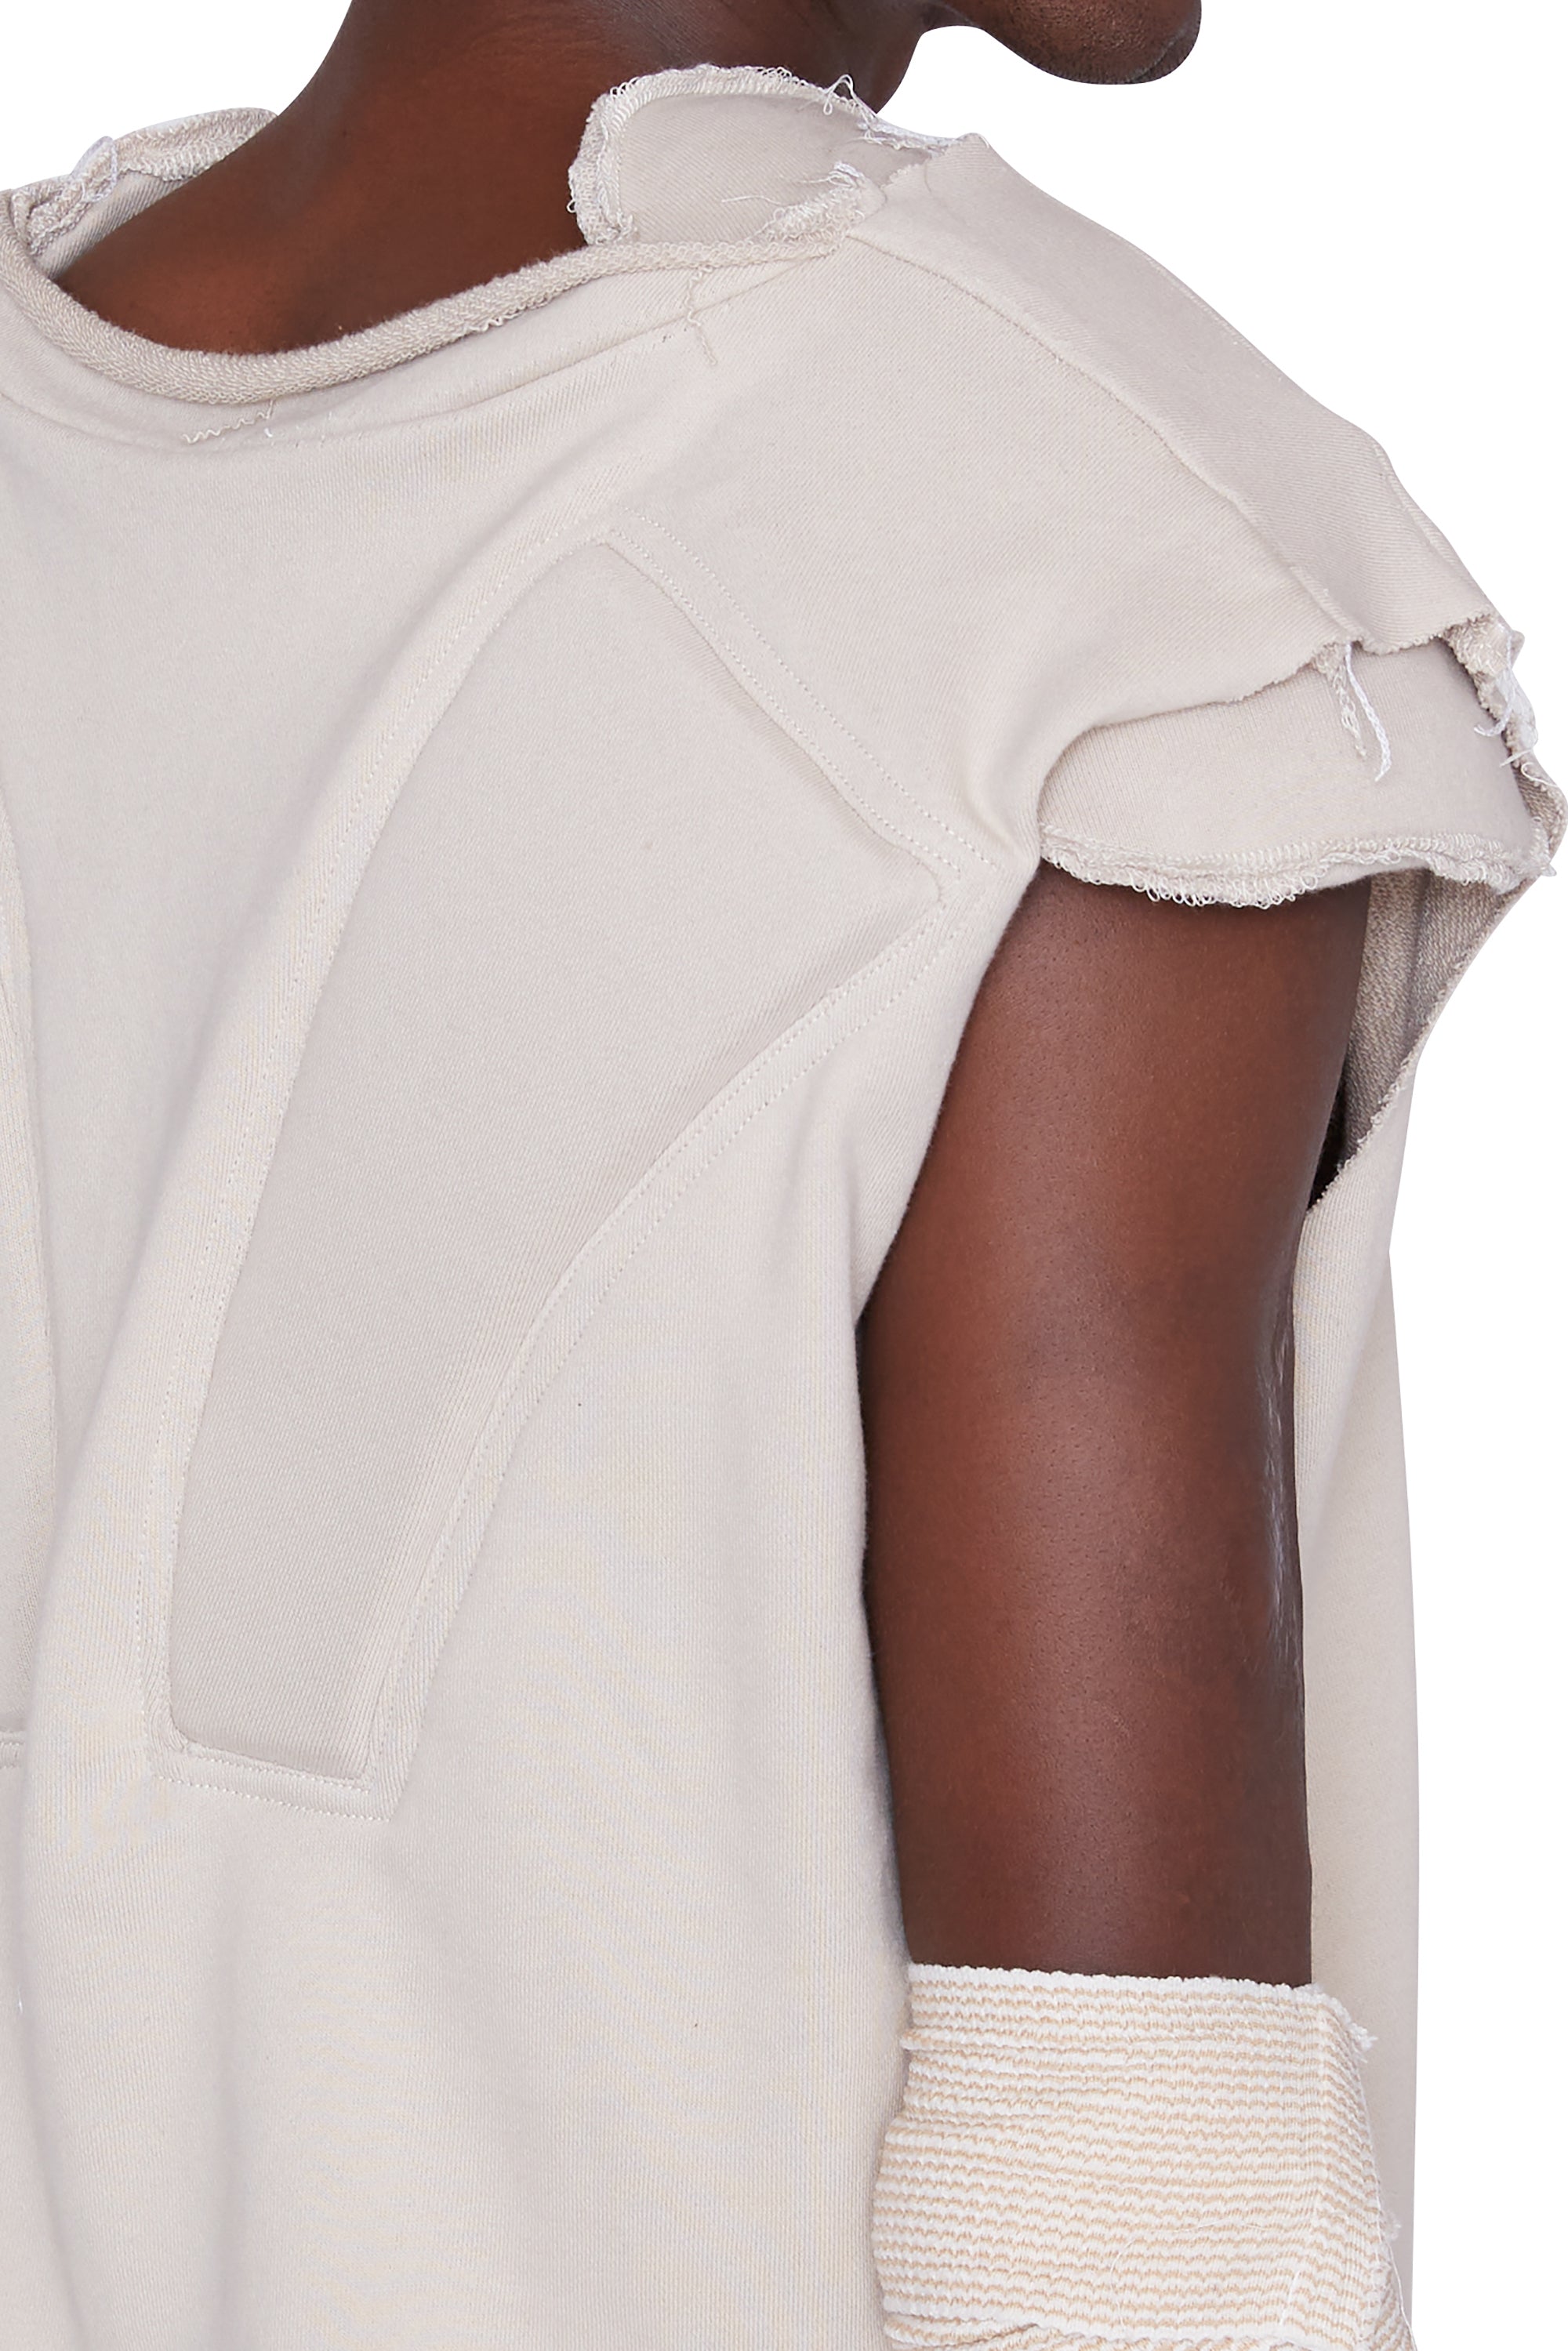 Shoulder Padded Muscle T (Sand)